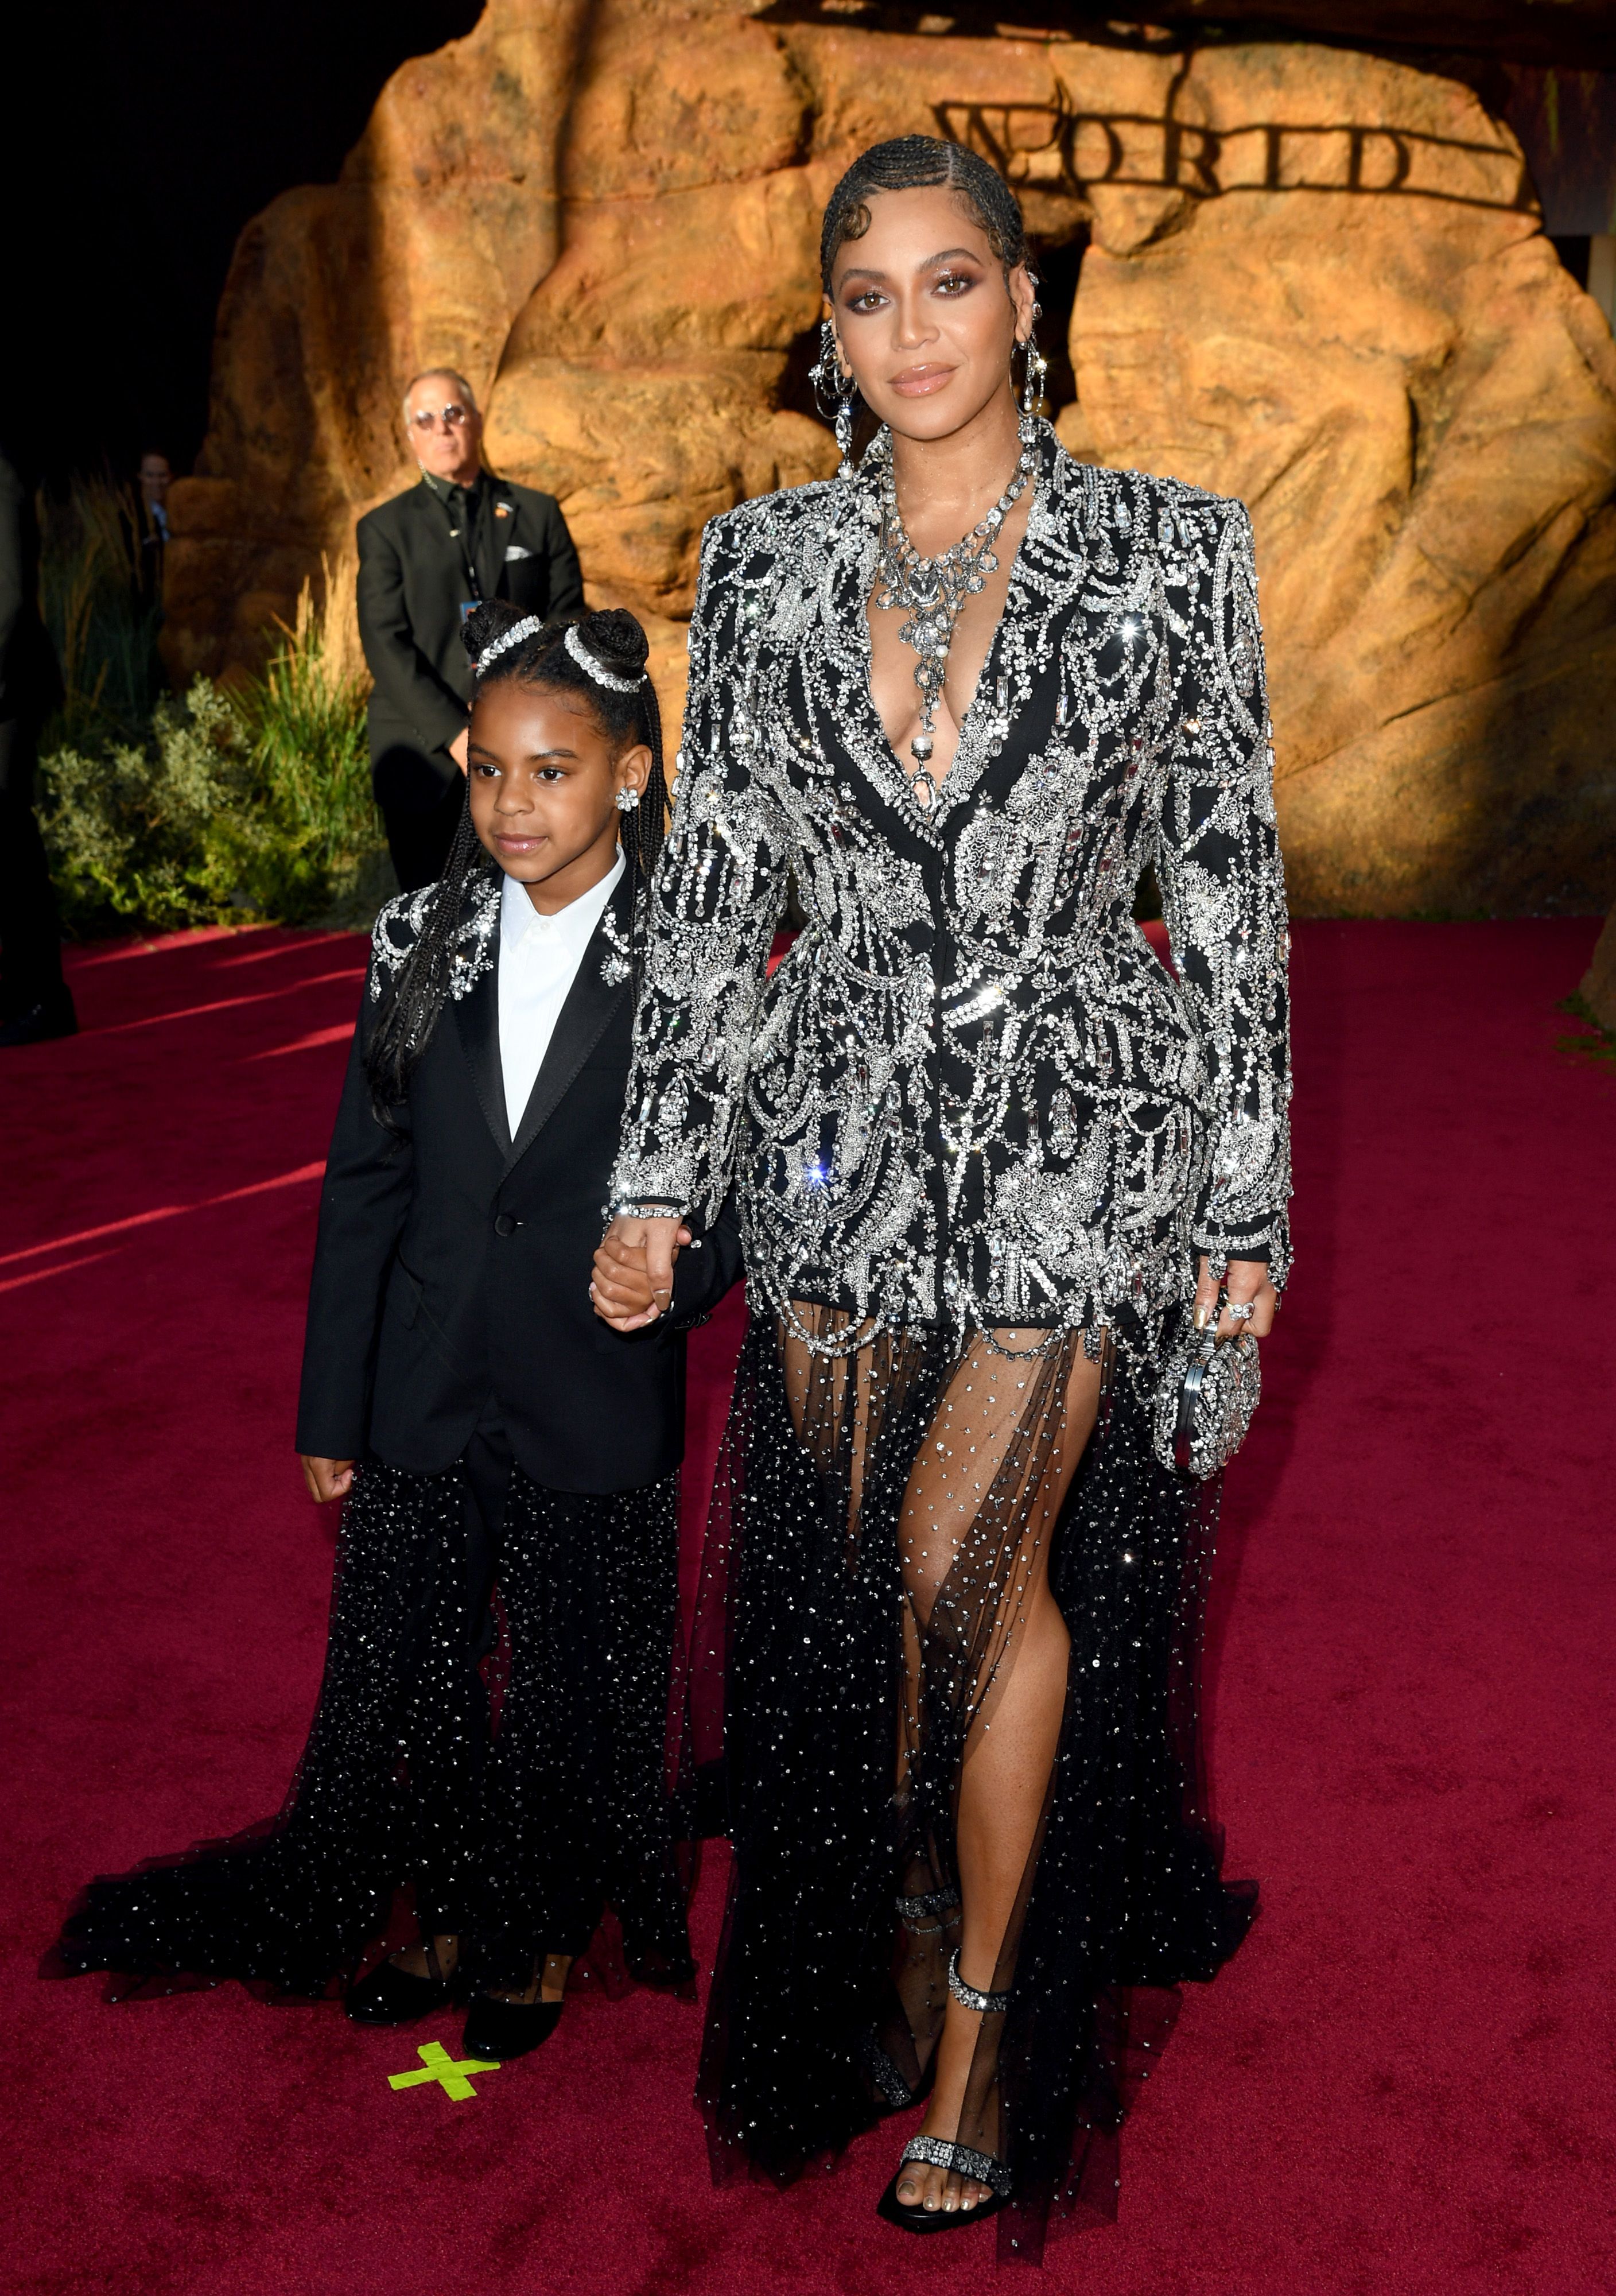 https://static.13.cl/7/sites/default/files/images/ocupload/blue-ivy-carter-and-beyonce-attends-the-premiere-of-disneys-news-photo-1161073811-1562743425.jpg